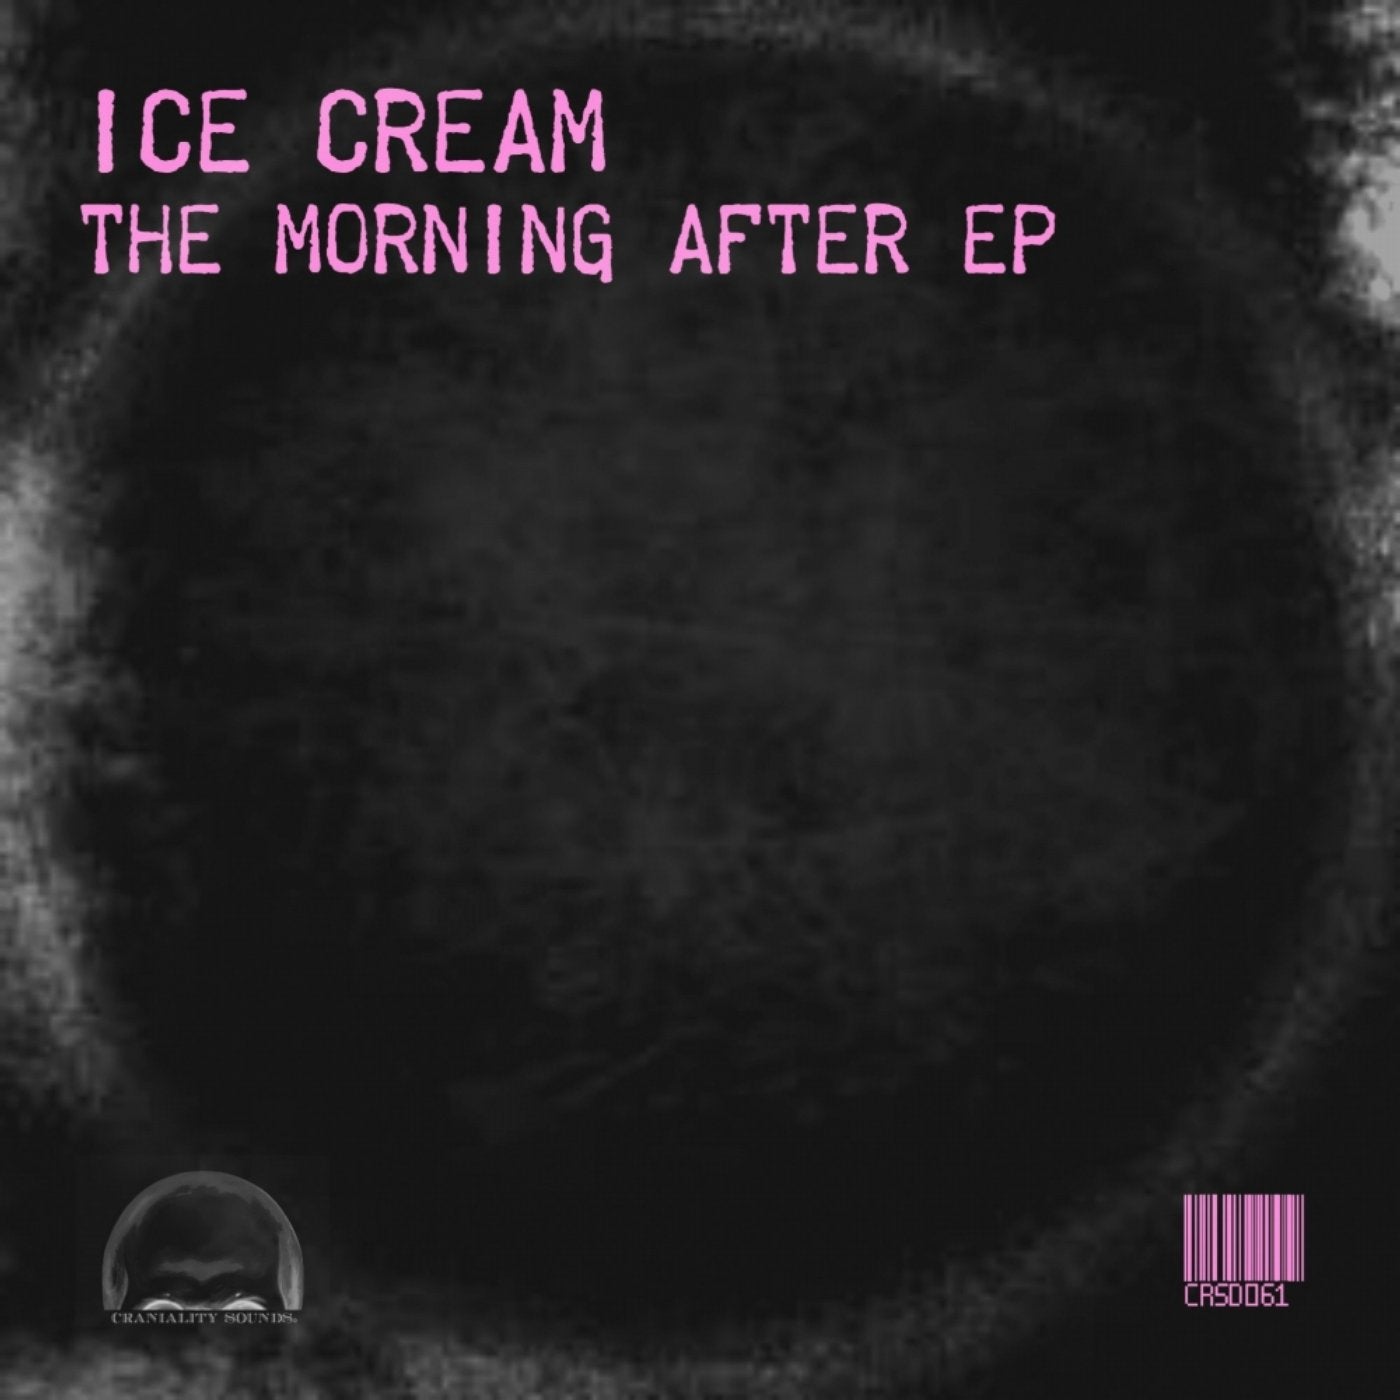 The Morning After EP